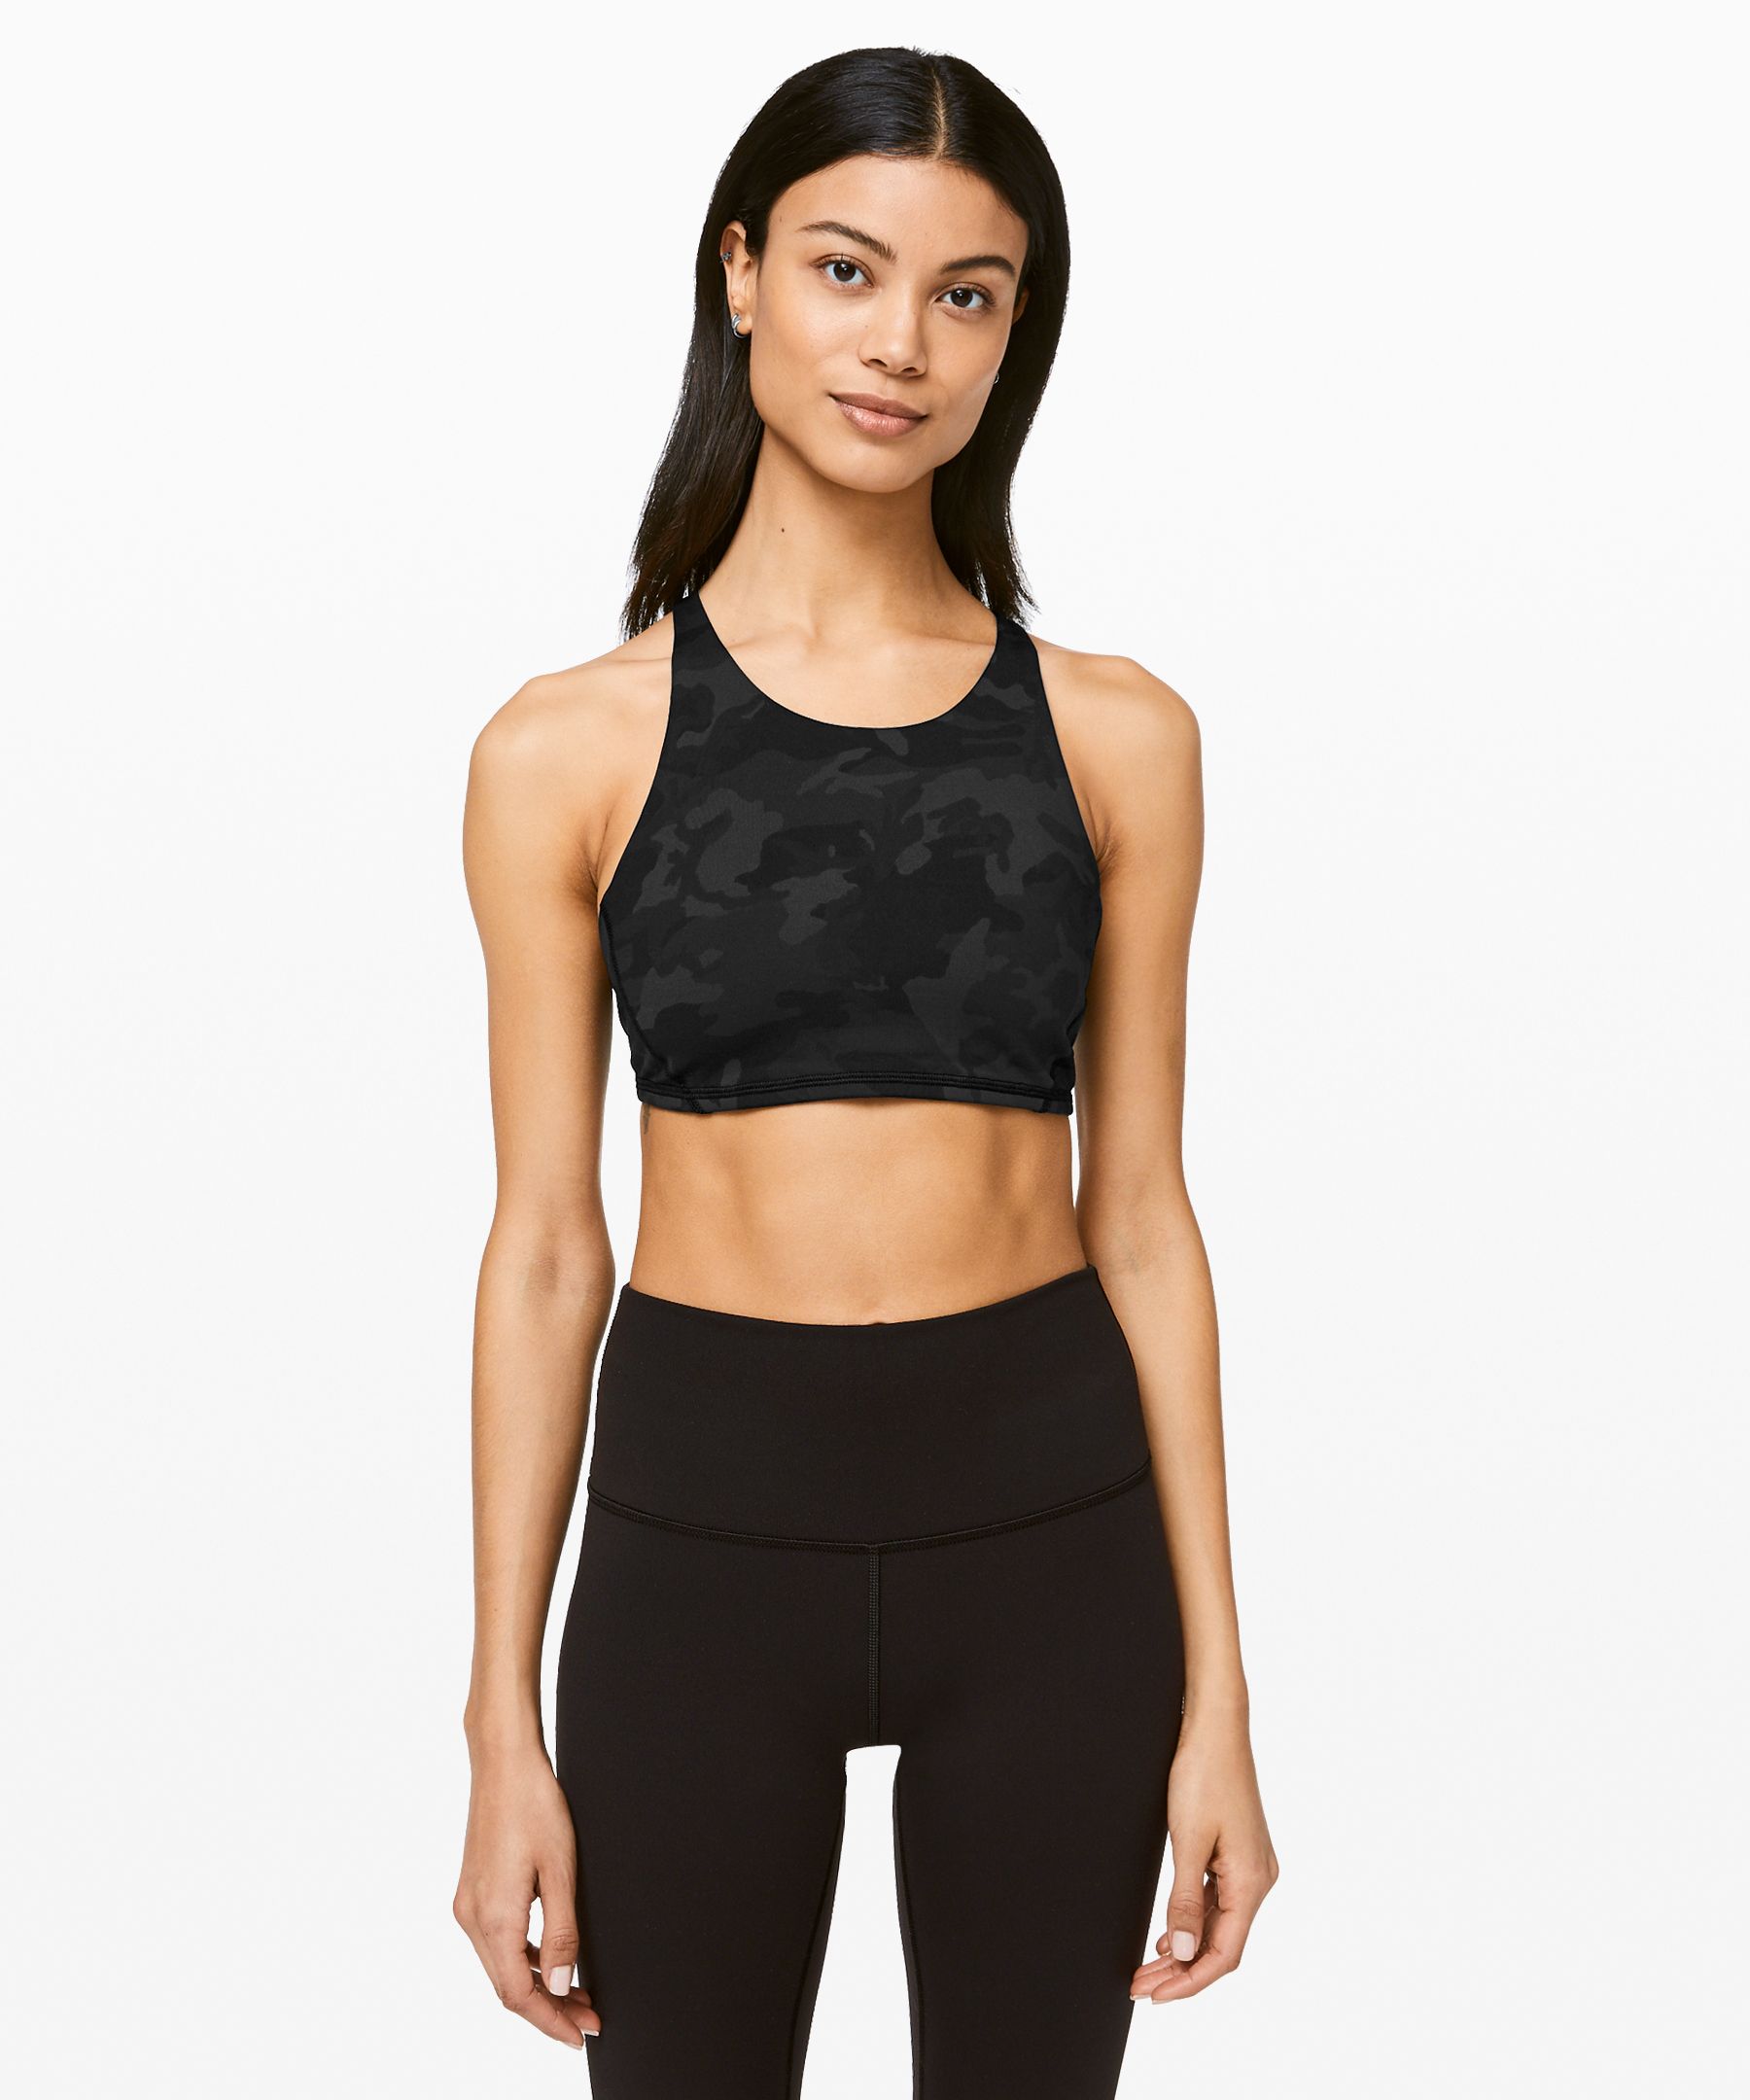 Lululemon Free To Be Bra High Neck*light Support, A/b Cup (online